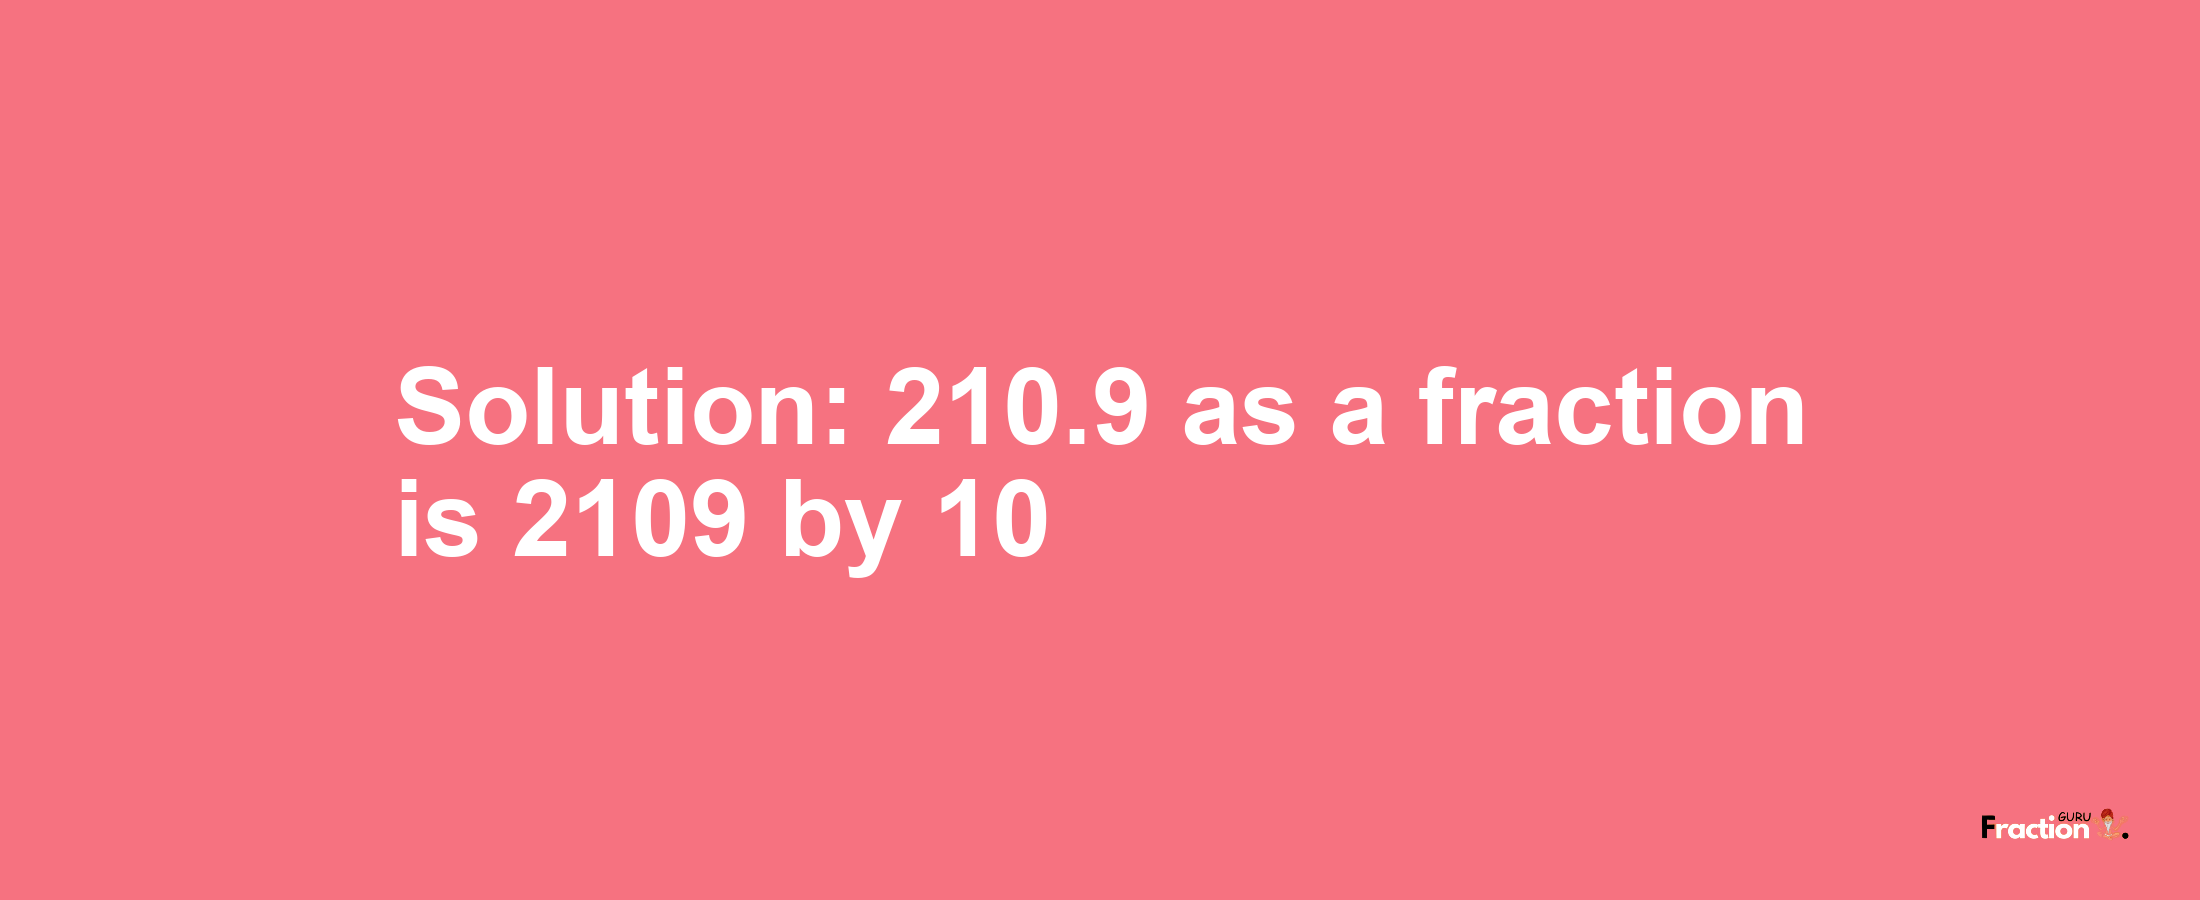 Solution:210.9 as a fraction is 2109/10